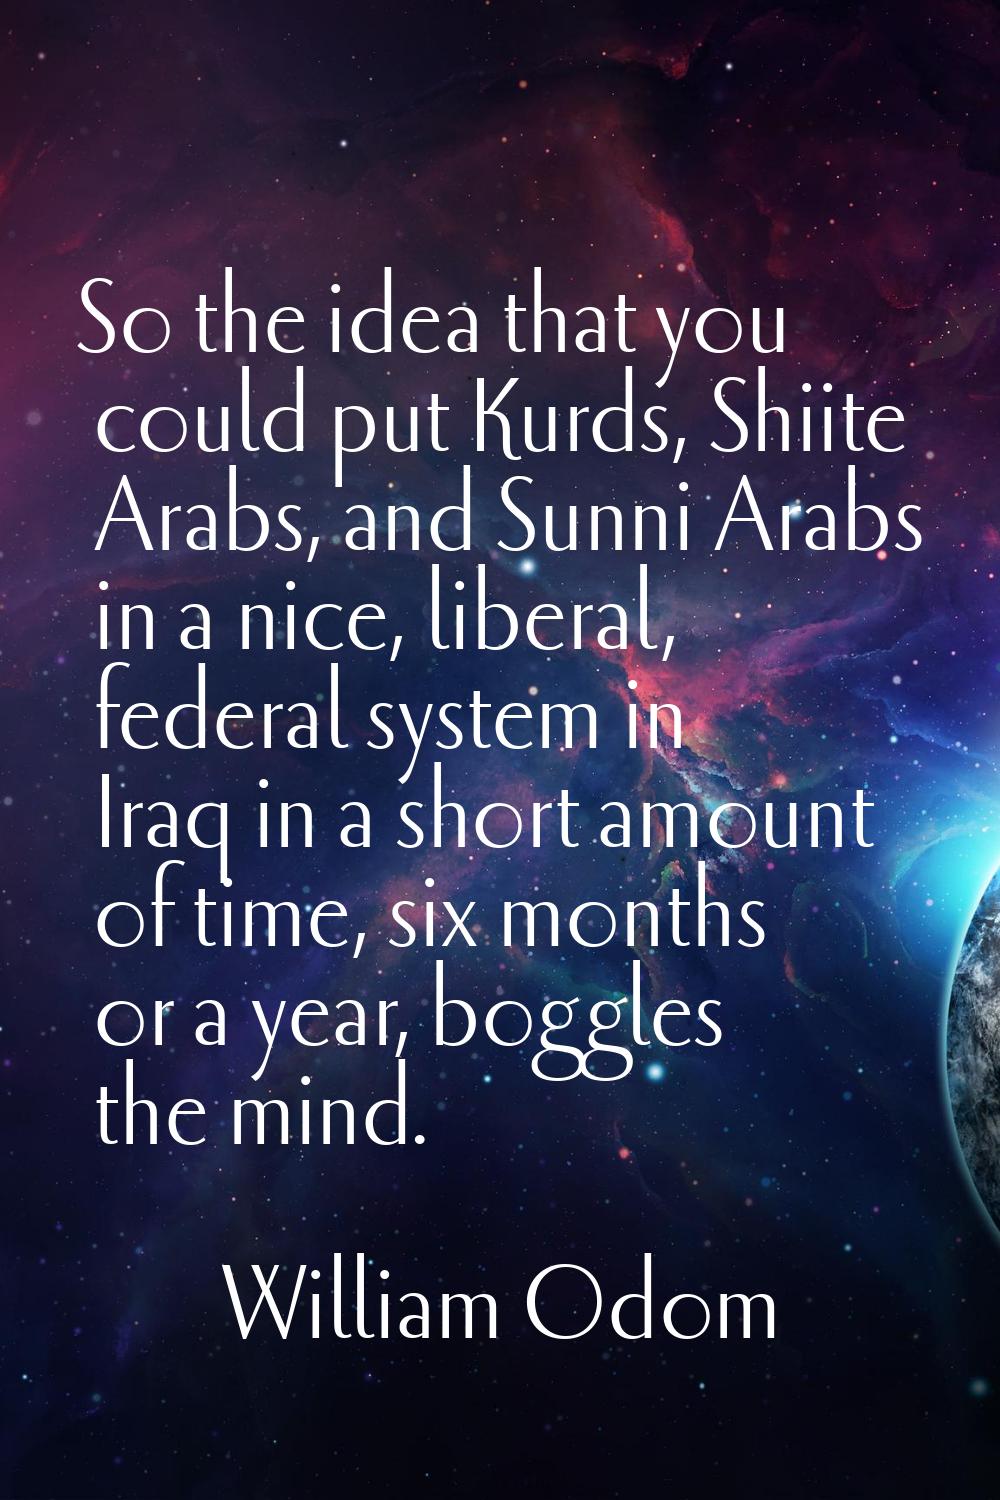 So the idea that you could put Kurds, Shiite Arabs, and Sunni Arabs in a nice, liberal, federal sys